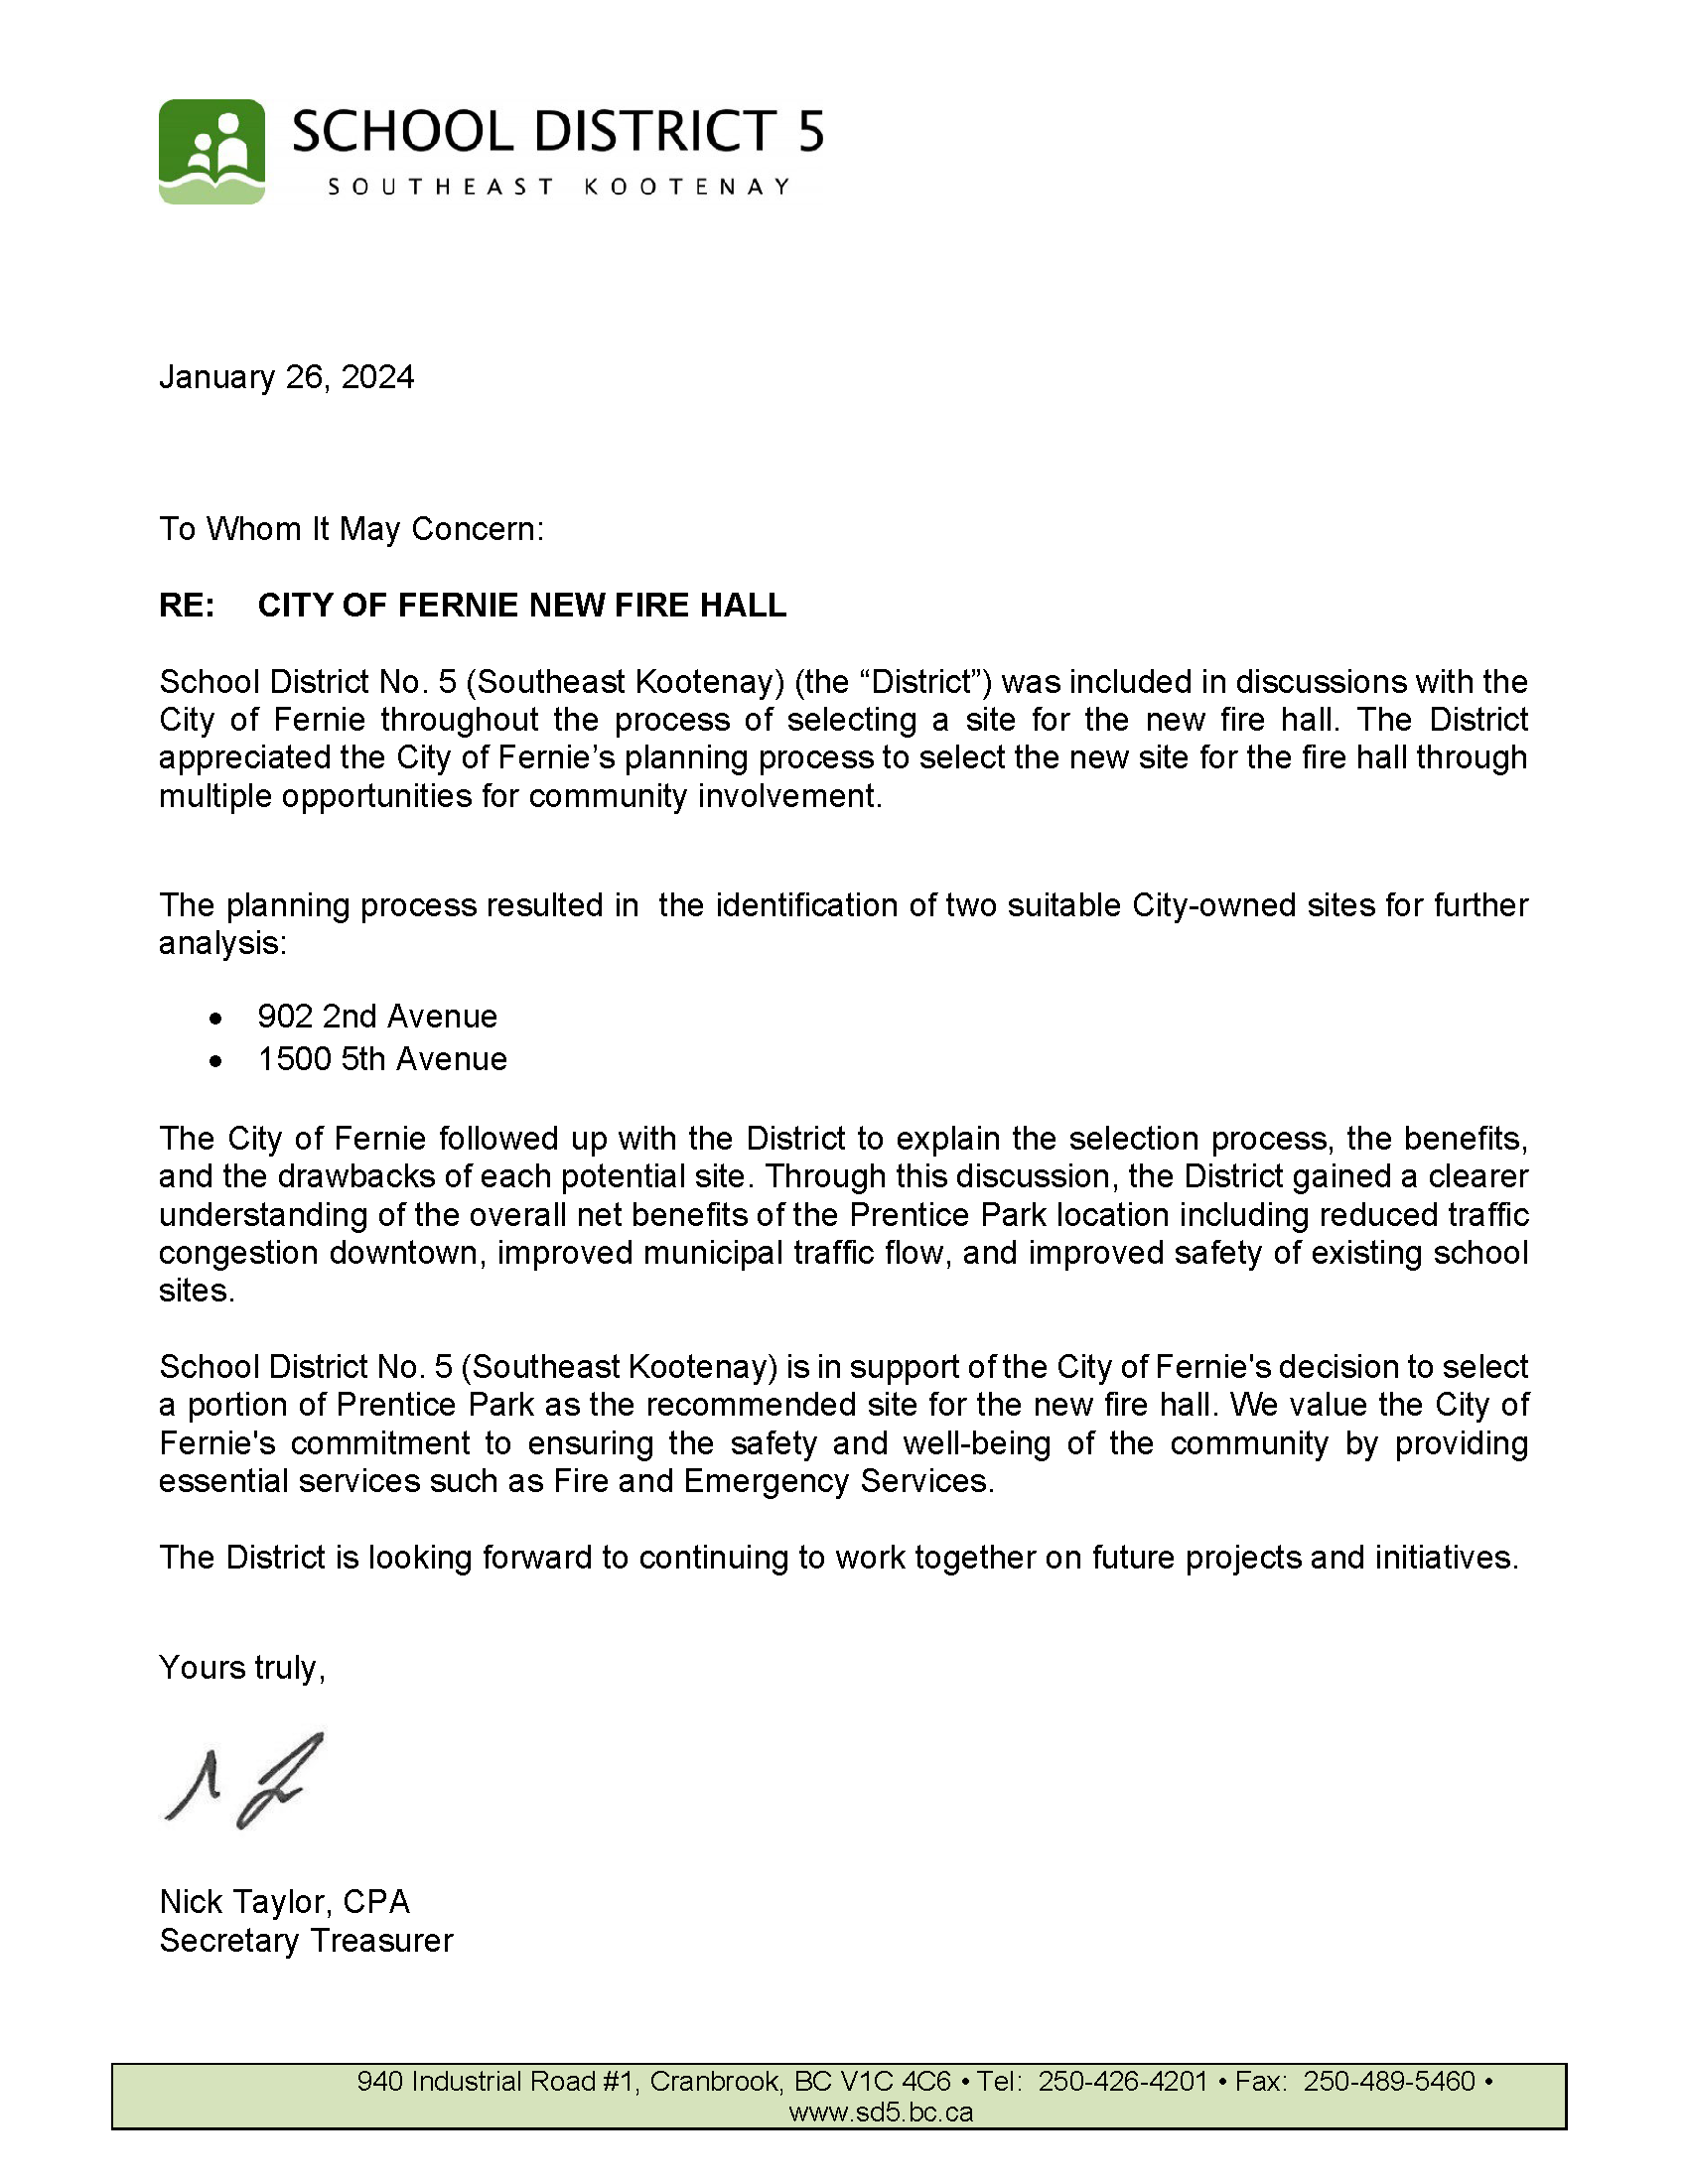 City of Fernie New Fire Hall - Letter of Support